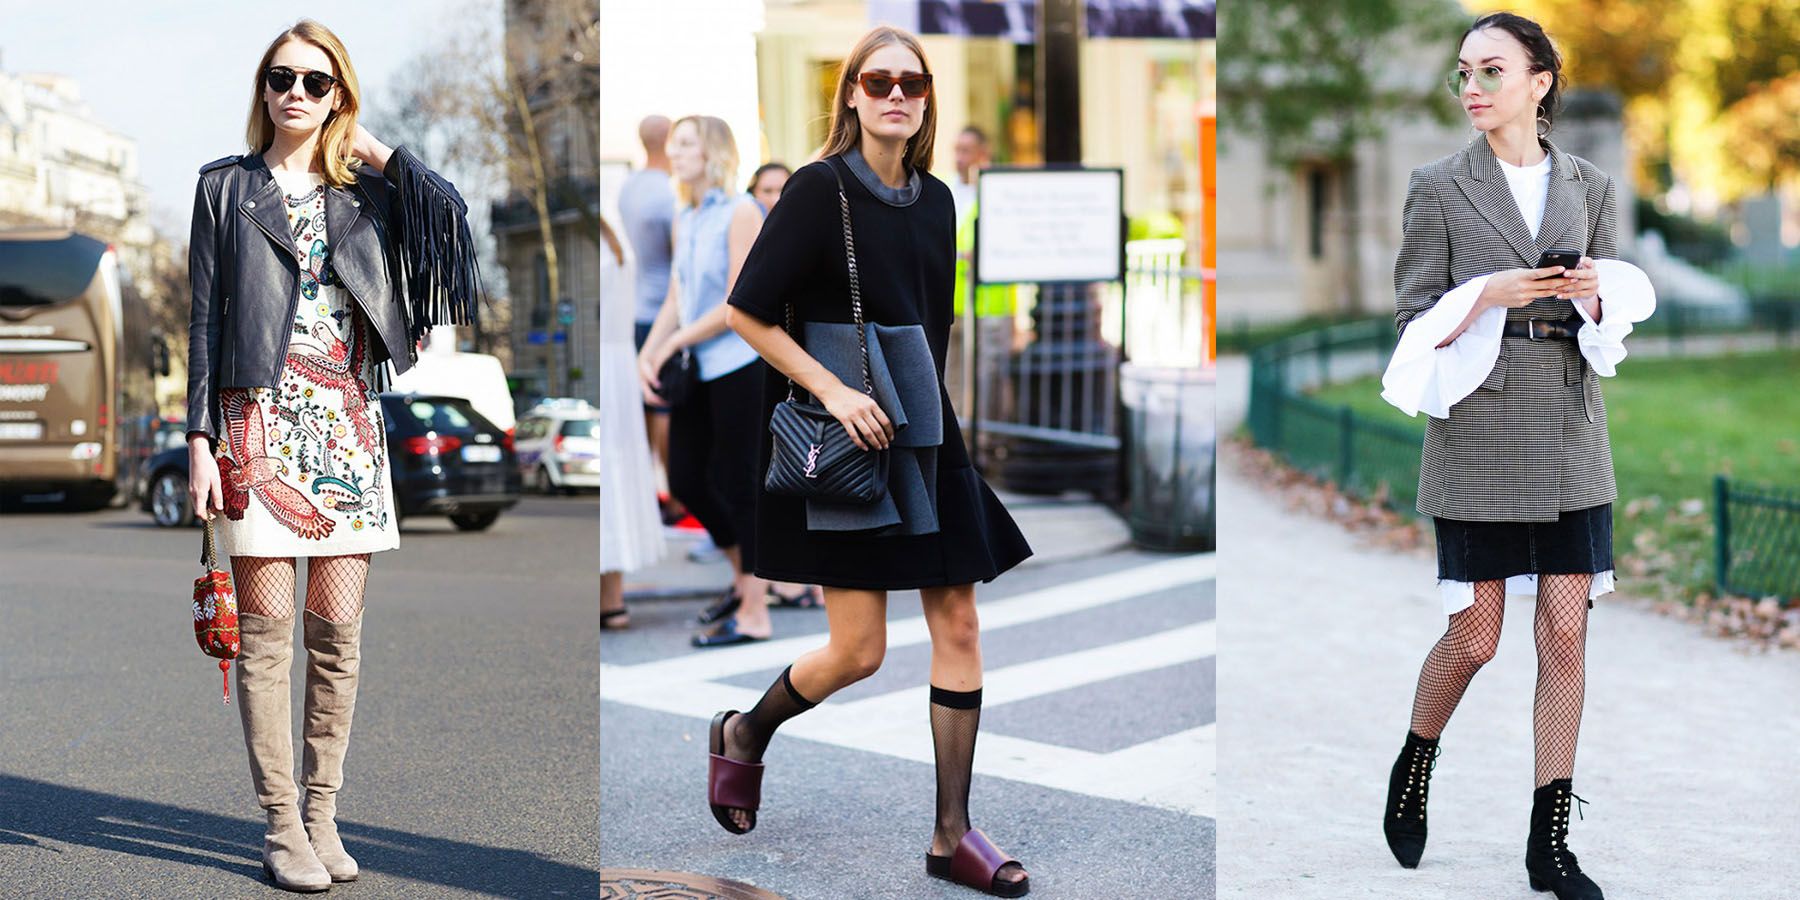 5 Fun Ways to Wear Stockings to Look More Fashionable!